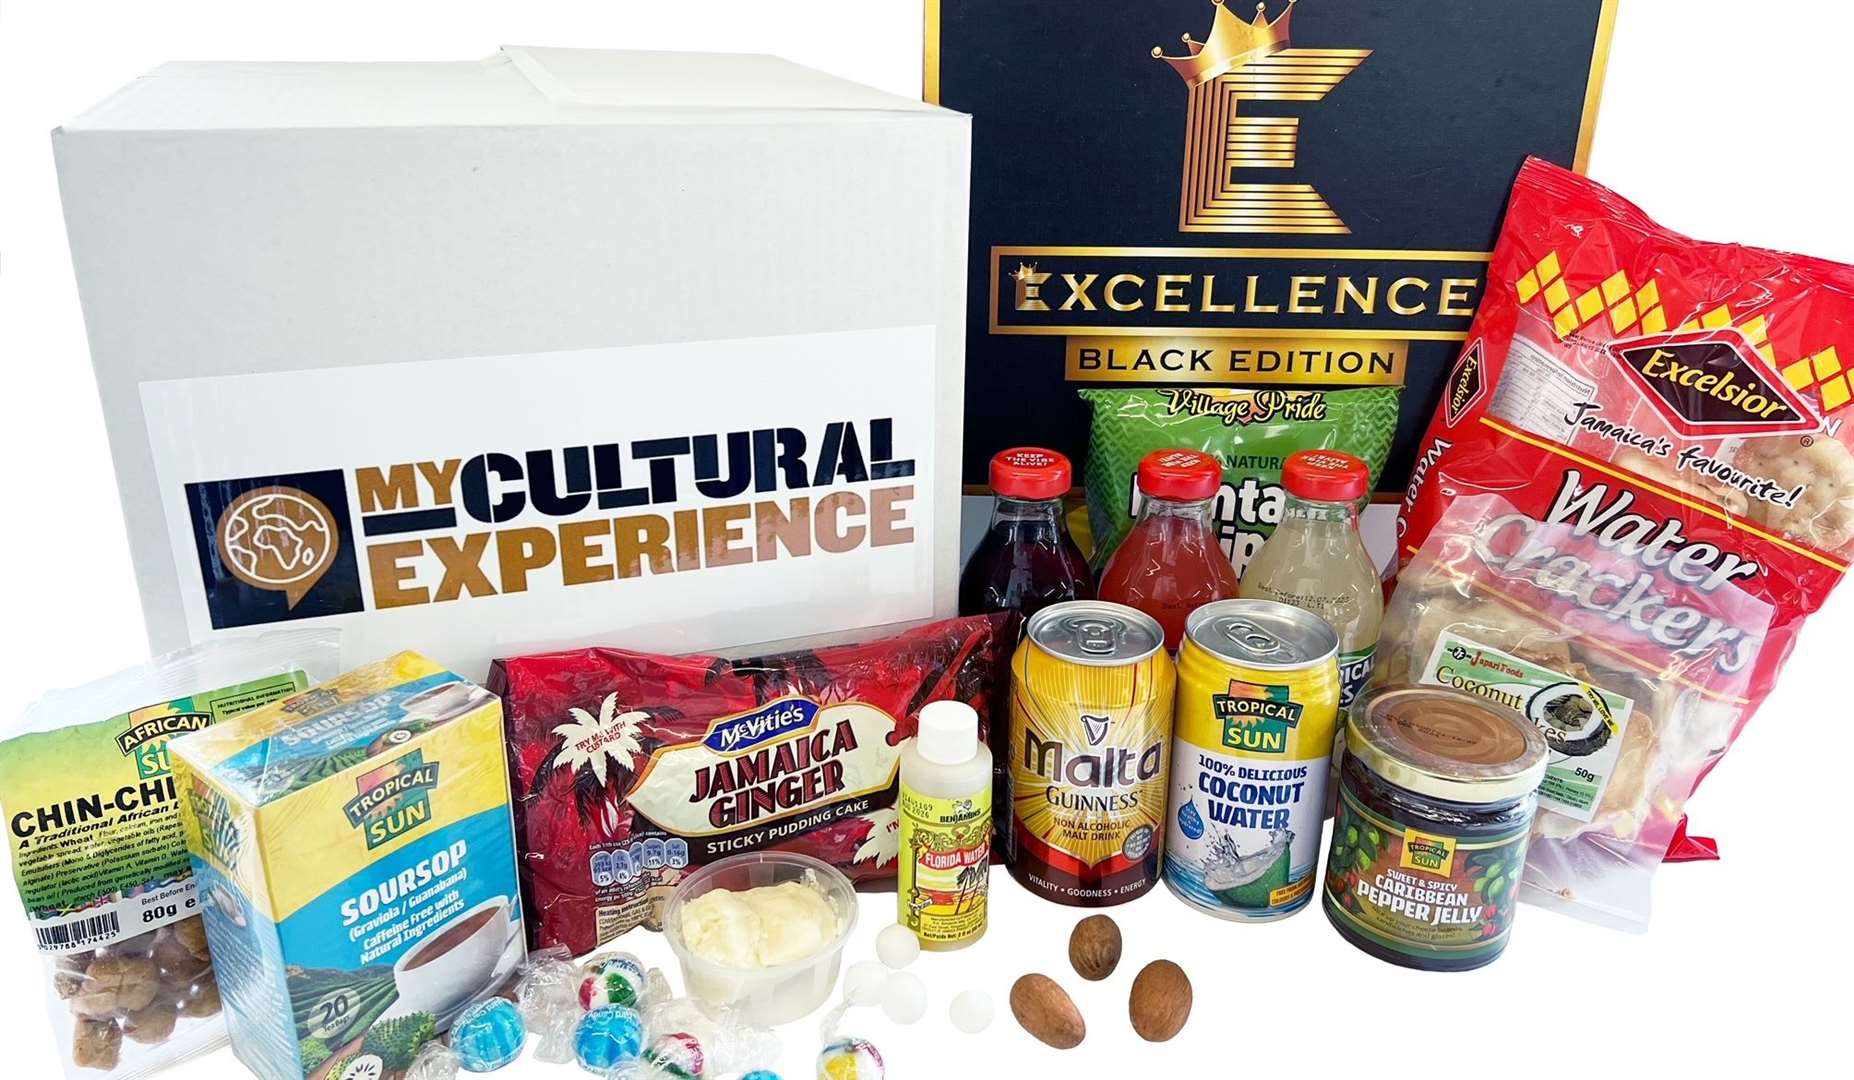 Companies will receive a number of items in the experience package